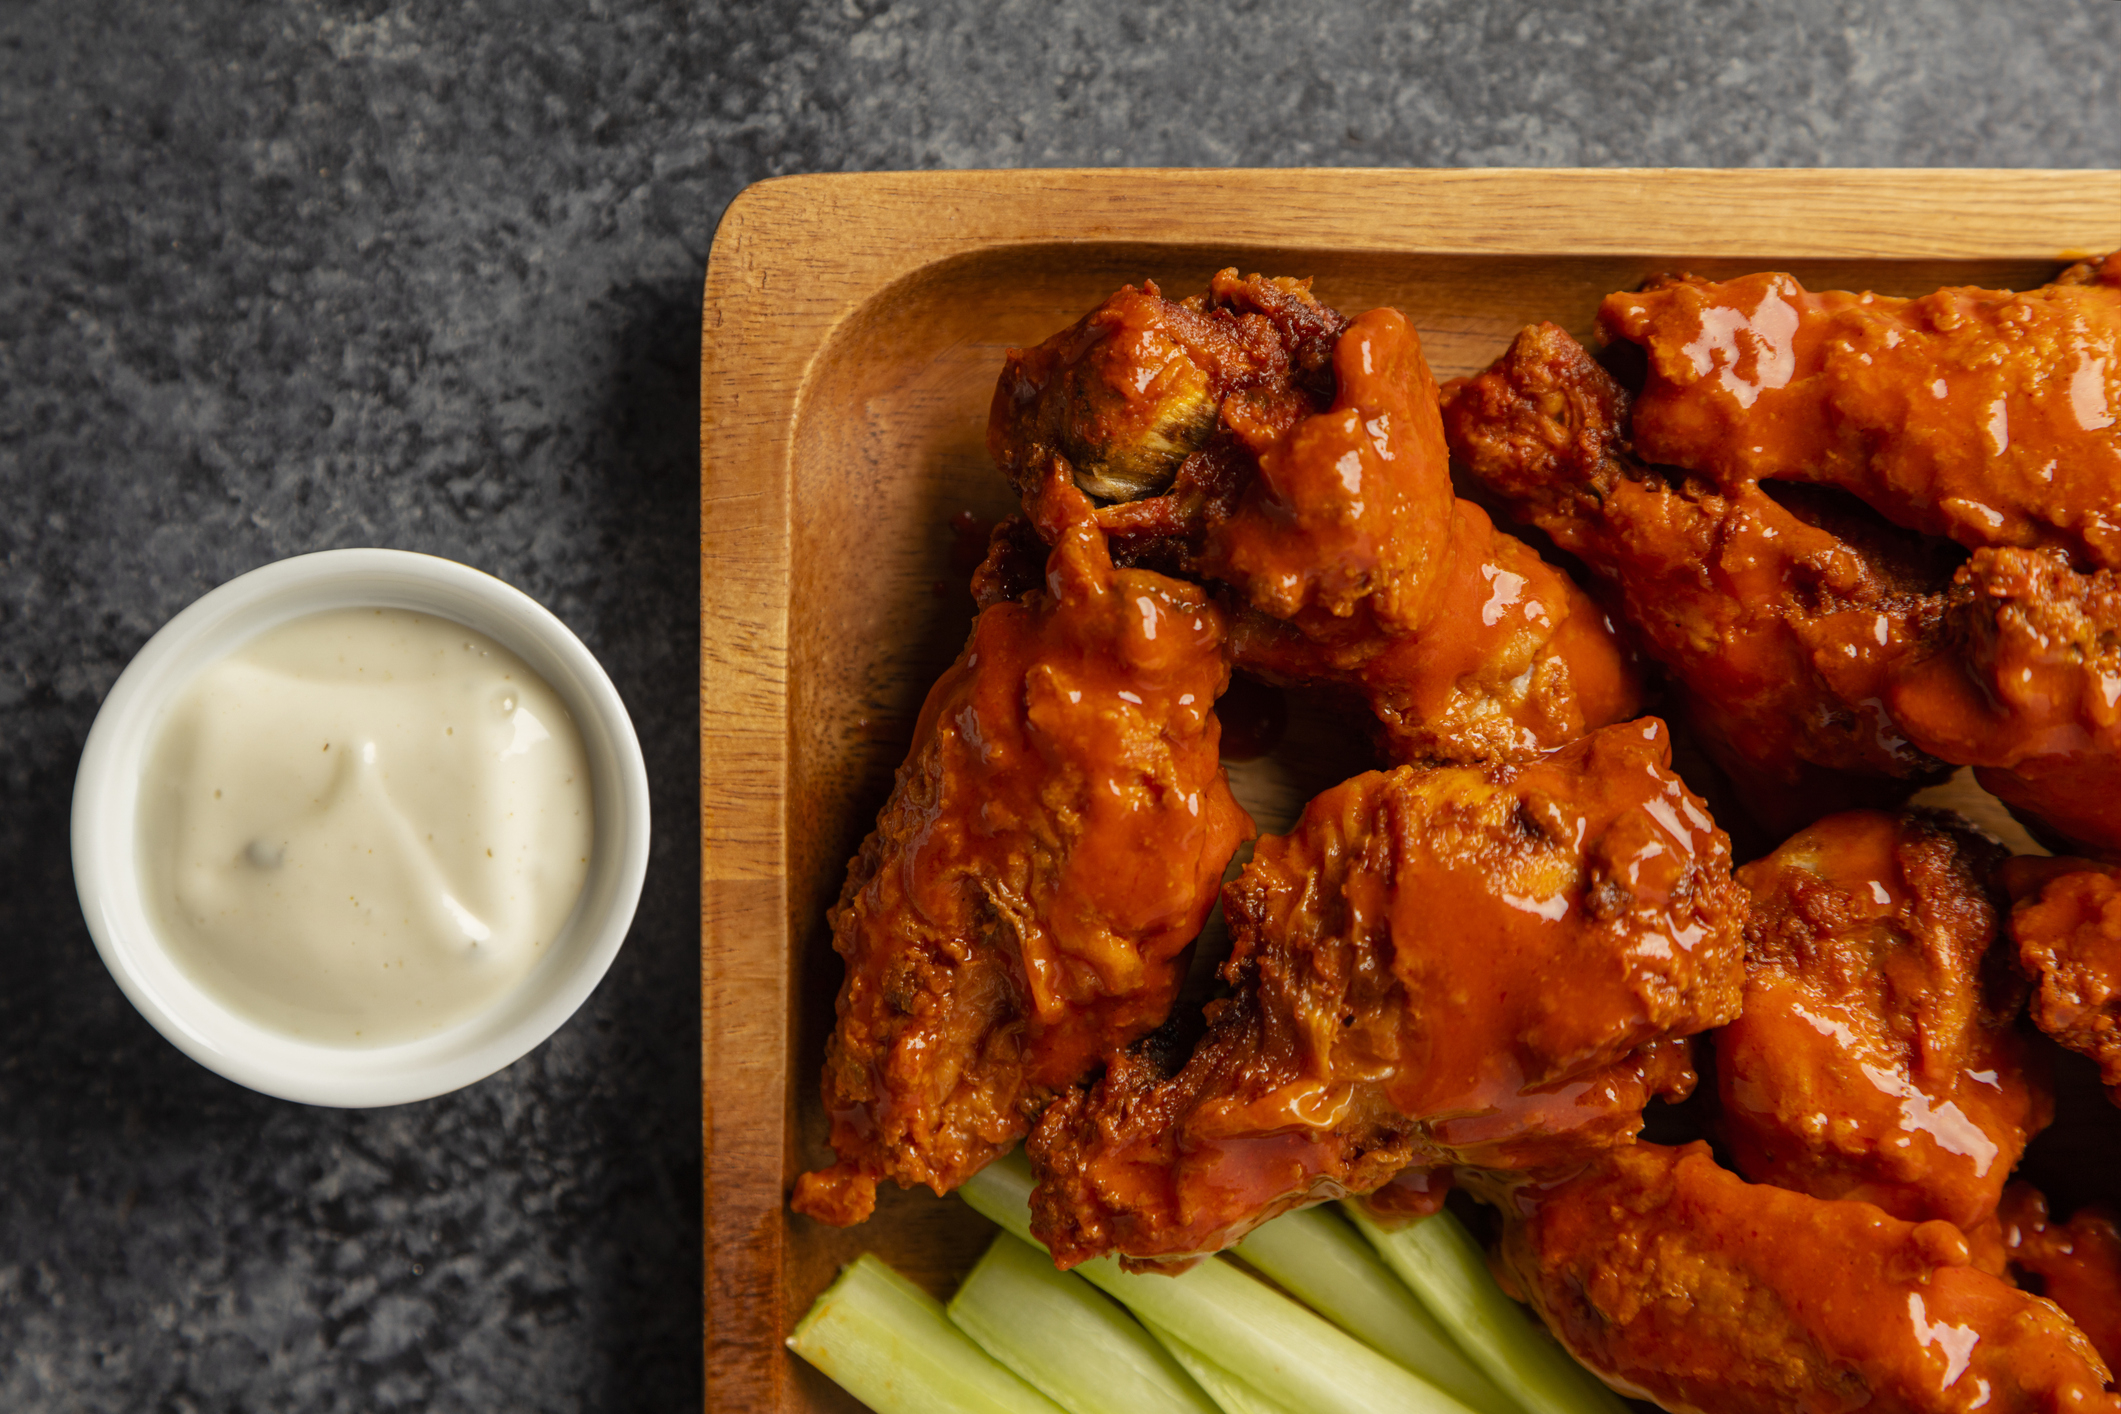 Buffalo wings on a plate with celery sticks and dipping sauce